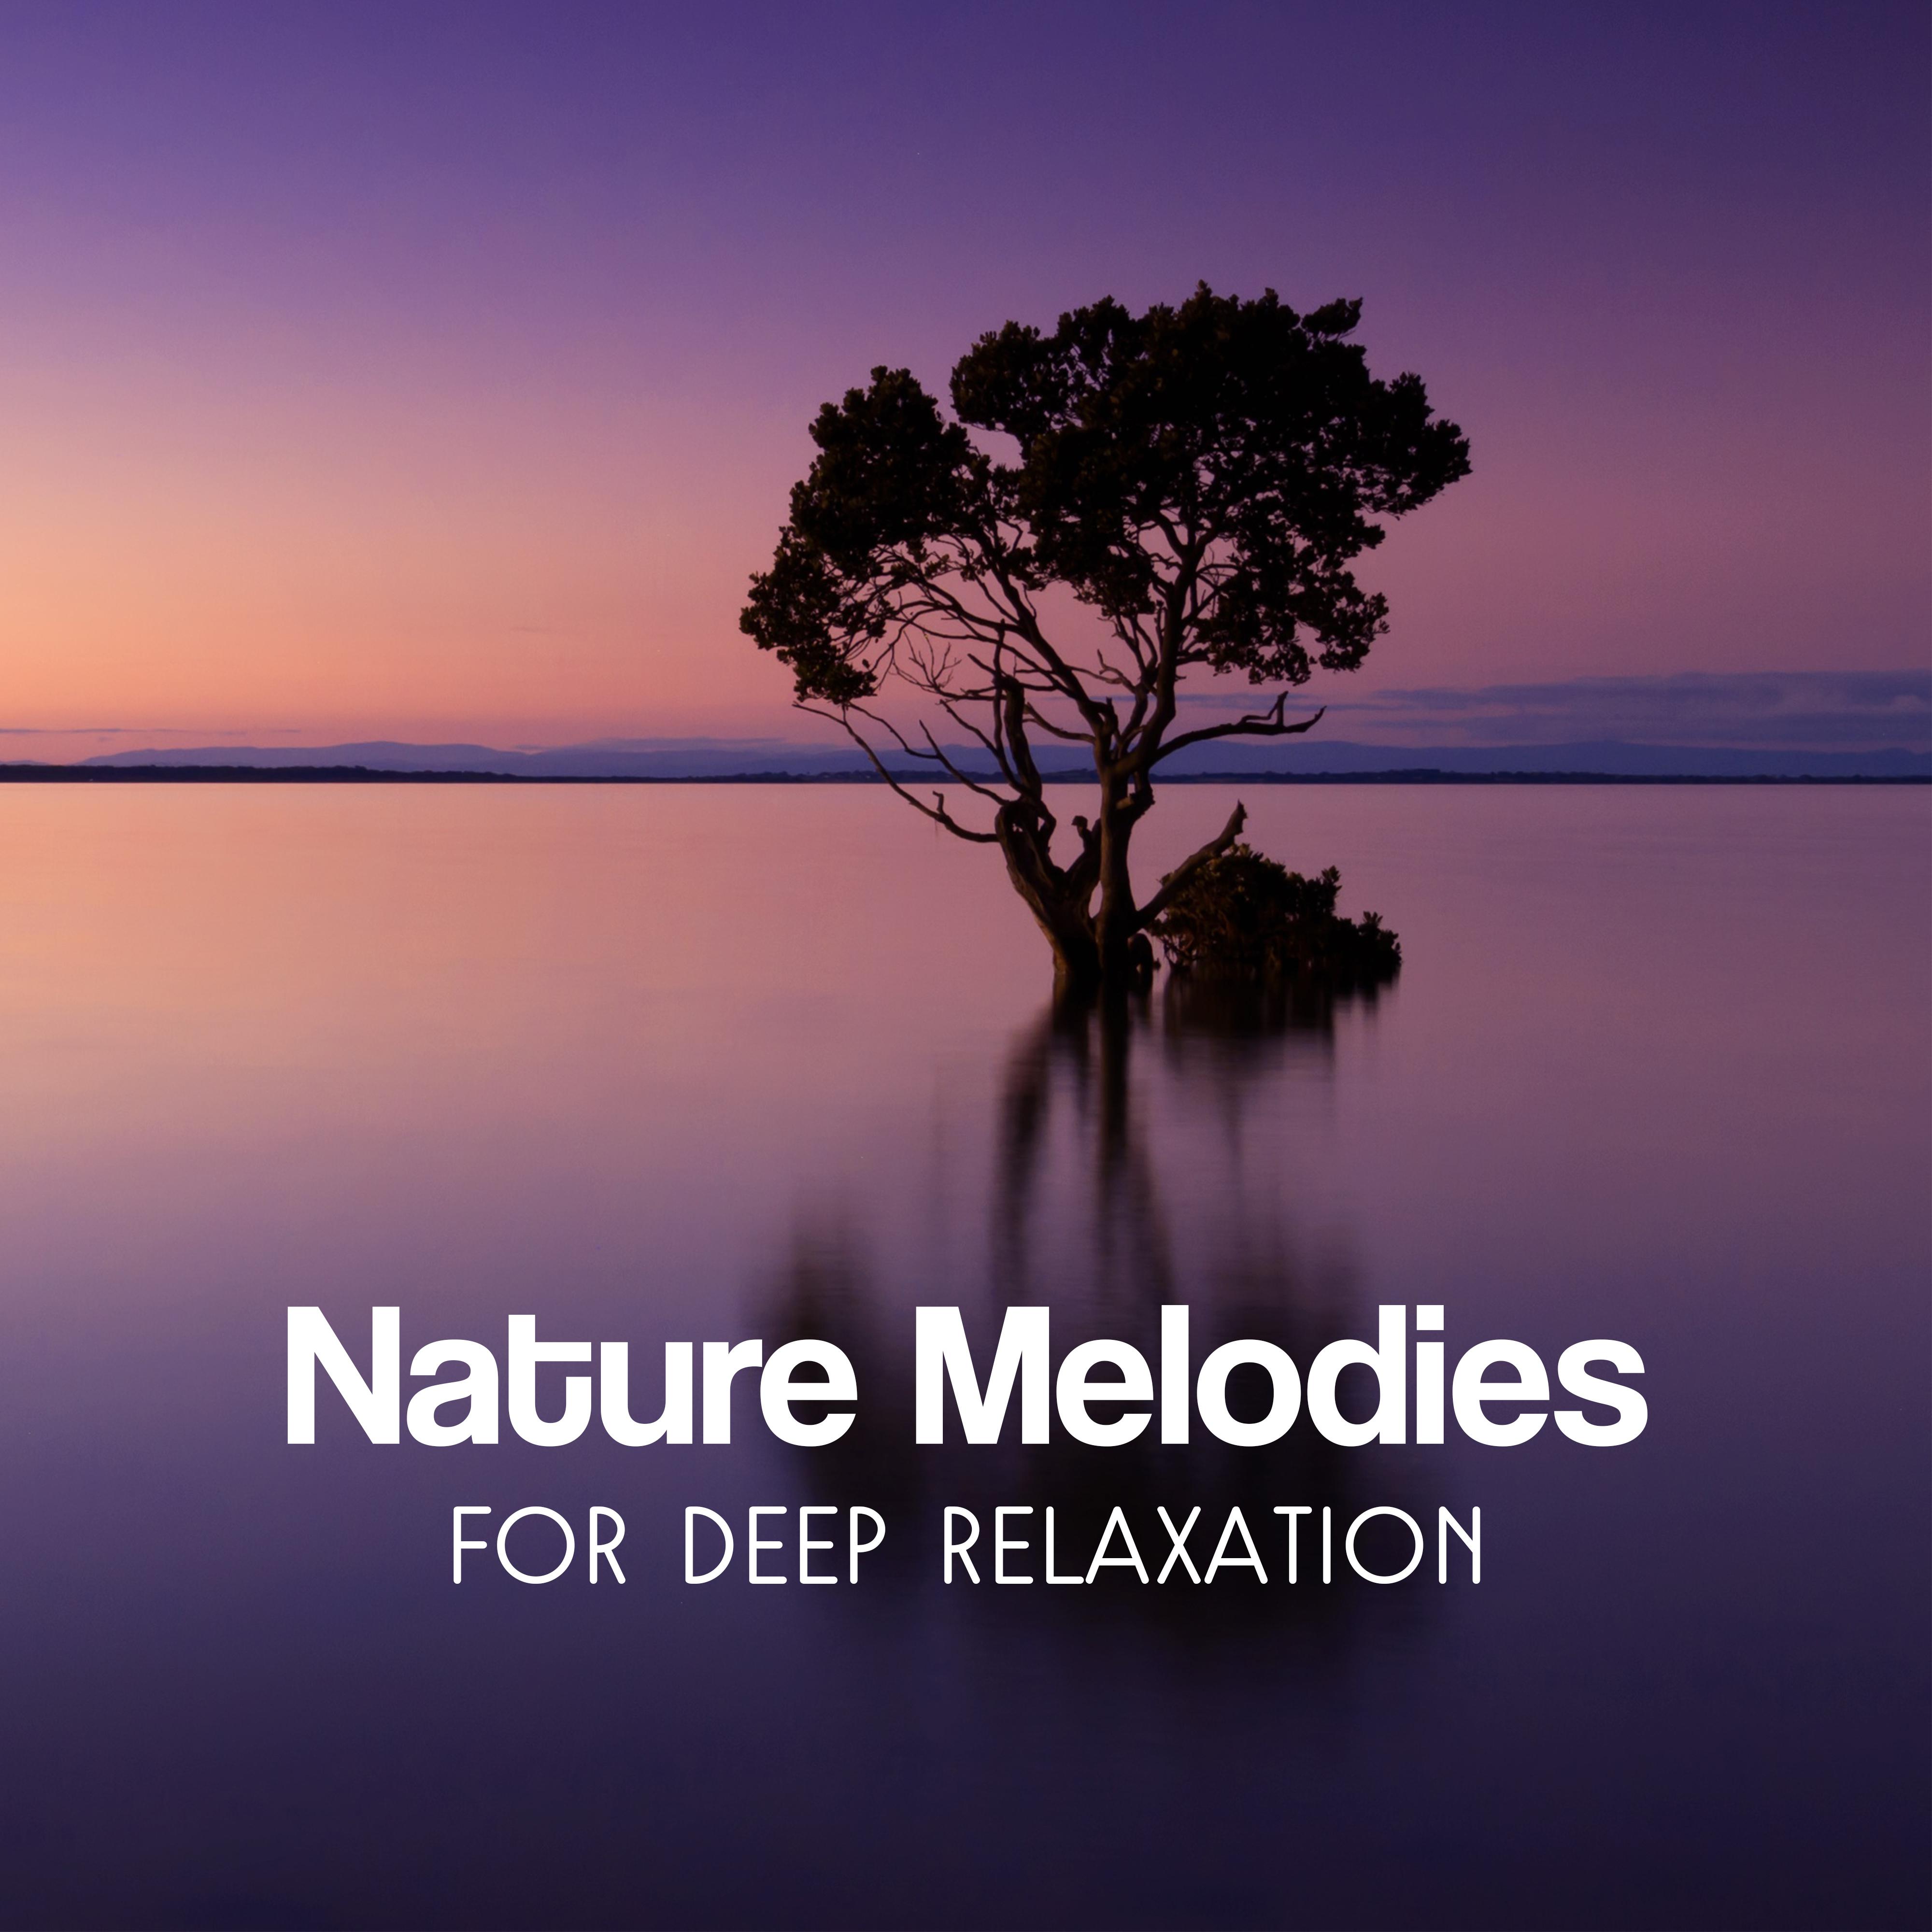 Nature Melodies for Deep Relaxation